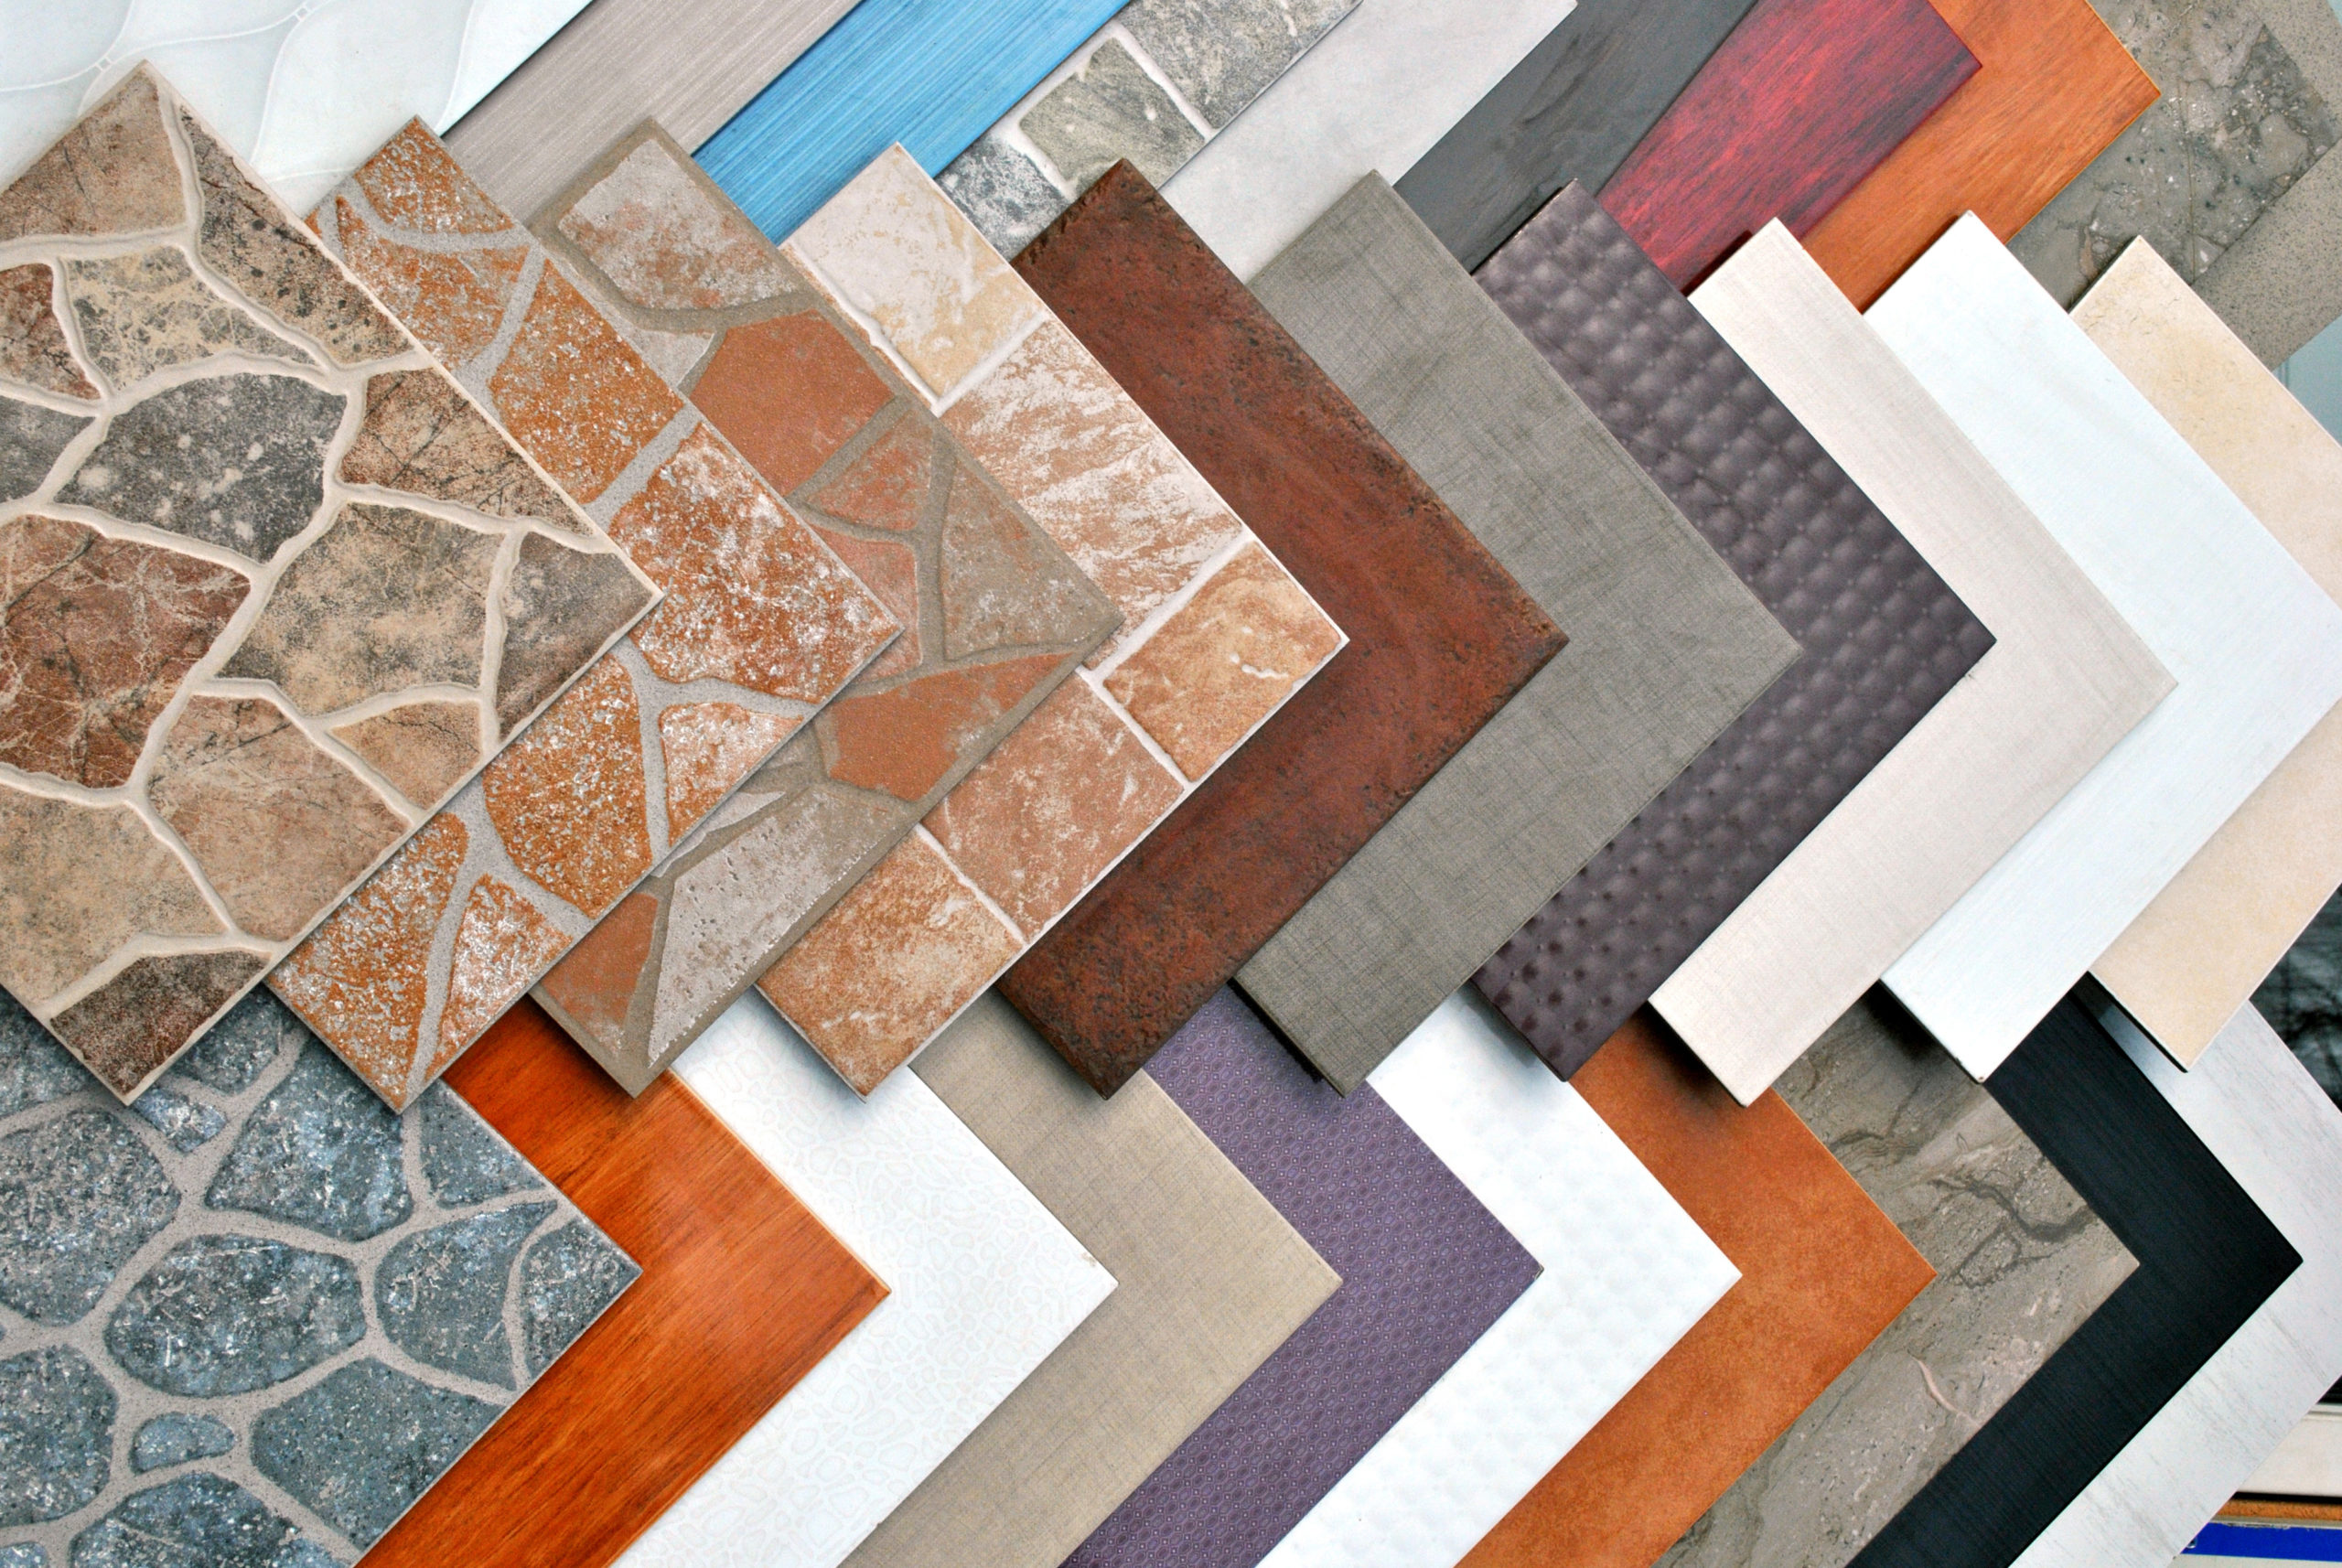 Modern Tile Trends to Inspire Your Next Remodel